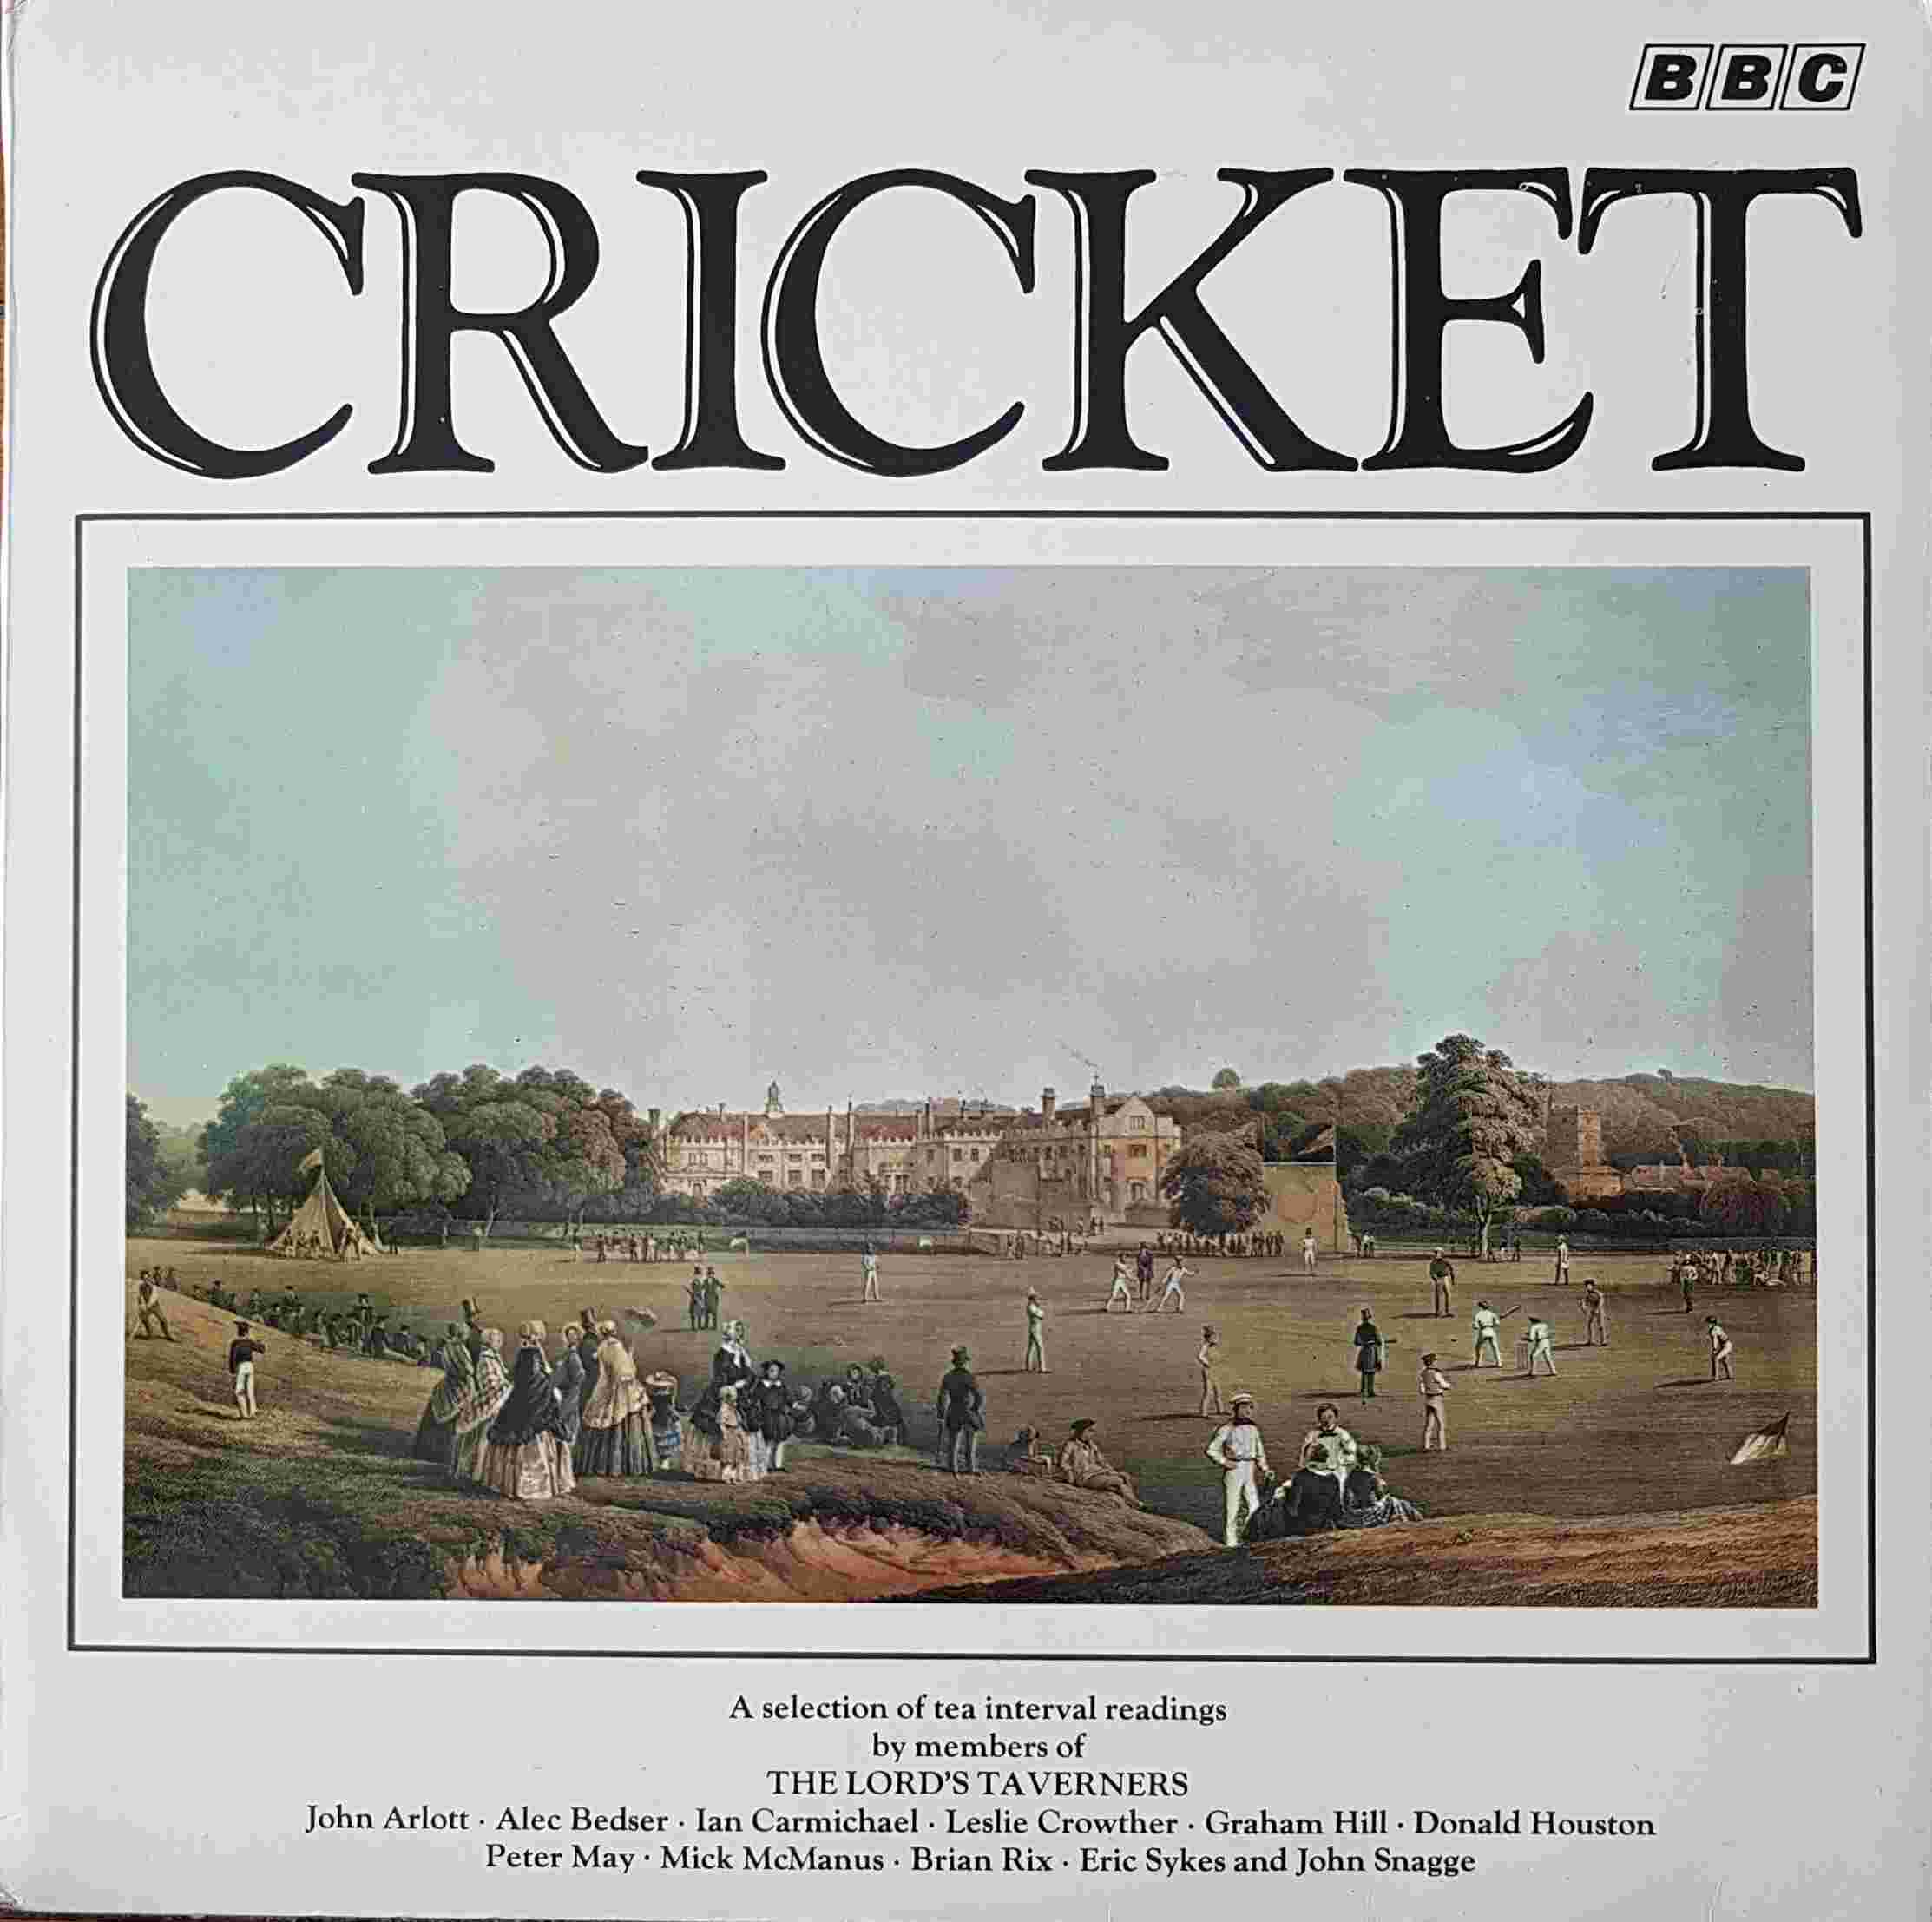 Picture of REC 86 Cricket by artist Various from the BBC albums - Records and Tapes library